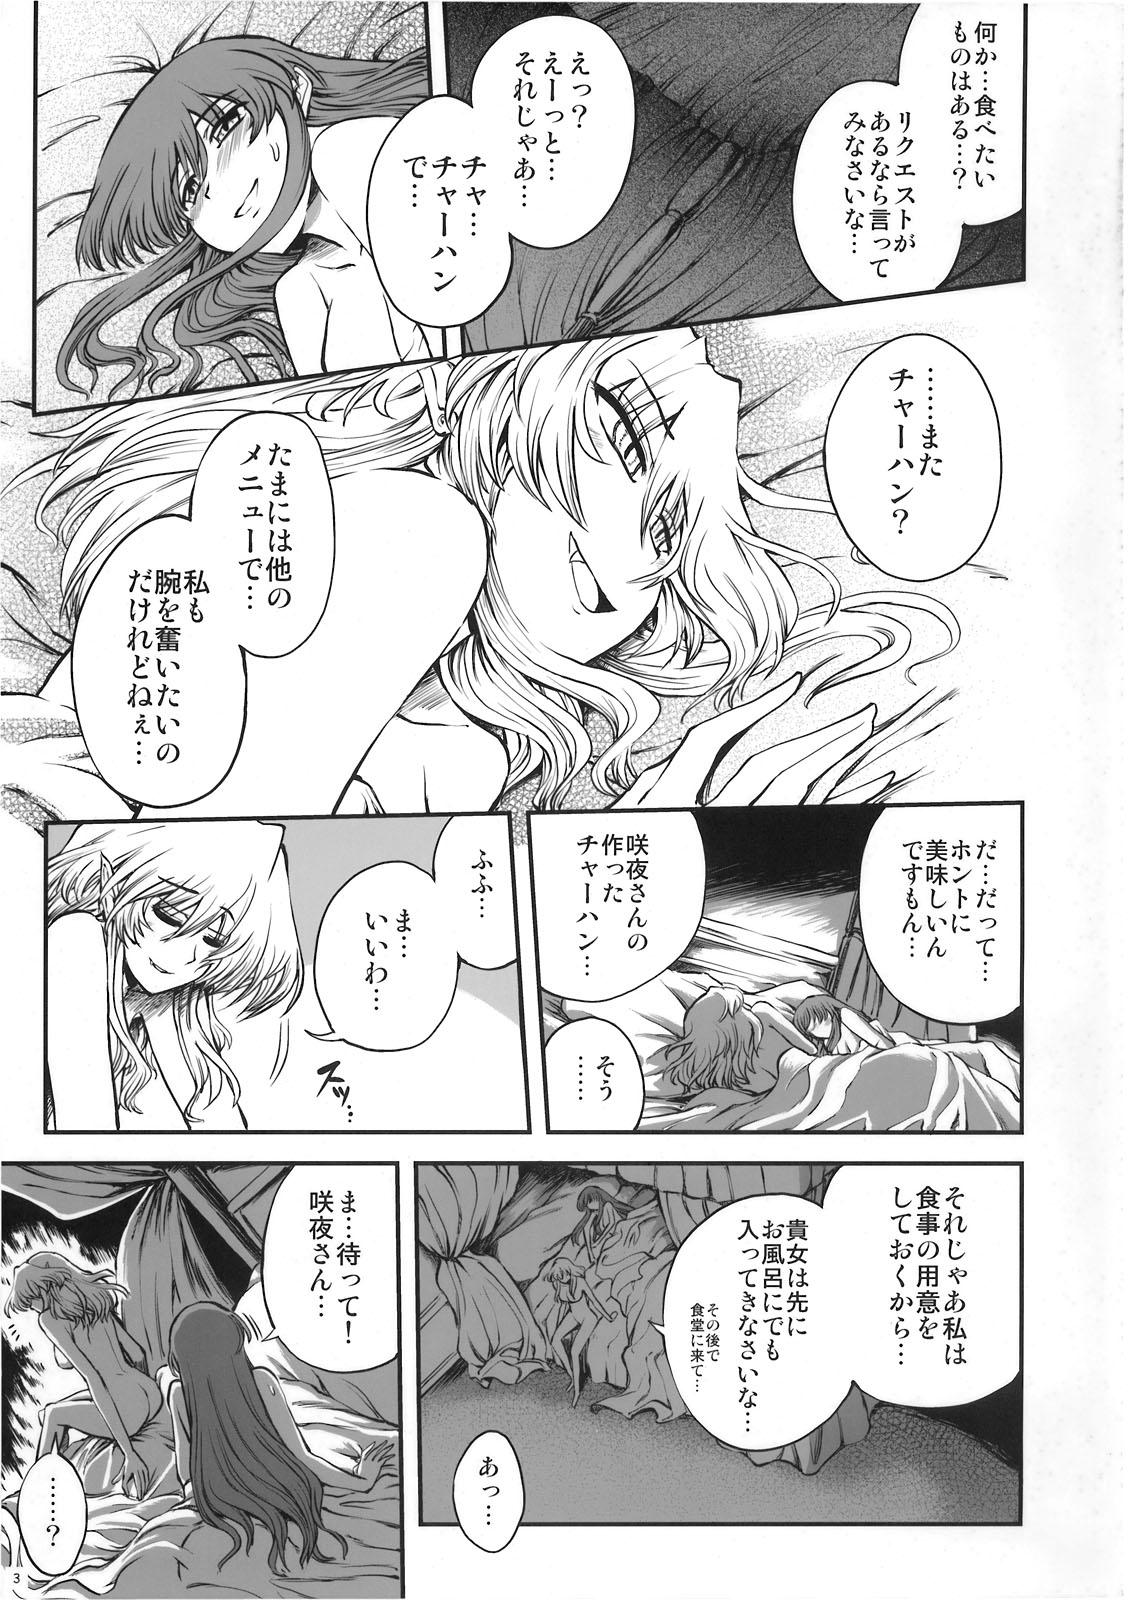 Guy Luna Dial Maid to Chi no Unmei dokei Lunatic+alpha - Touhou project Housewife - Page 4